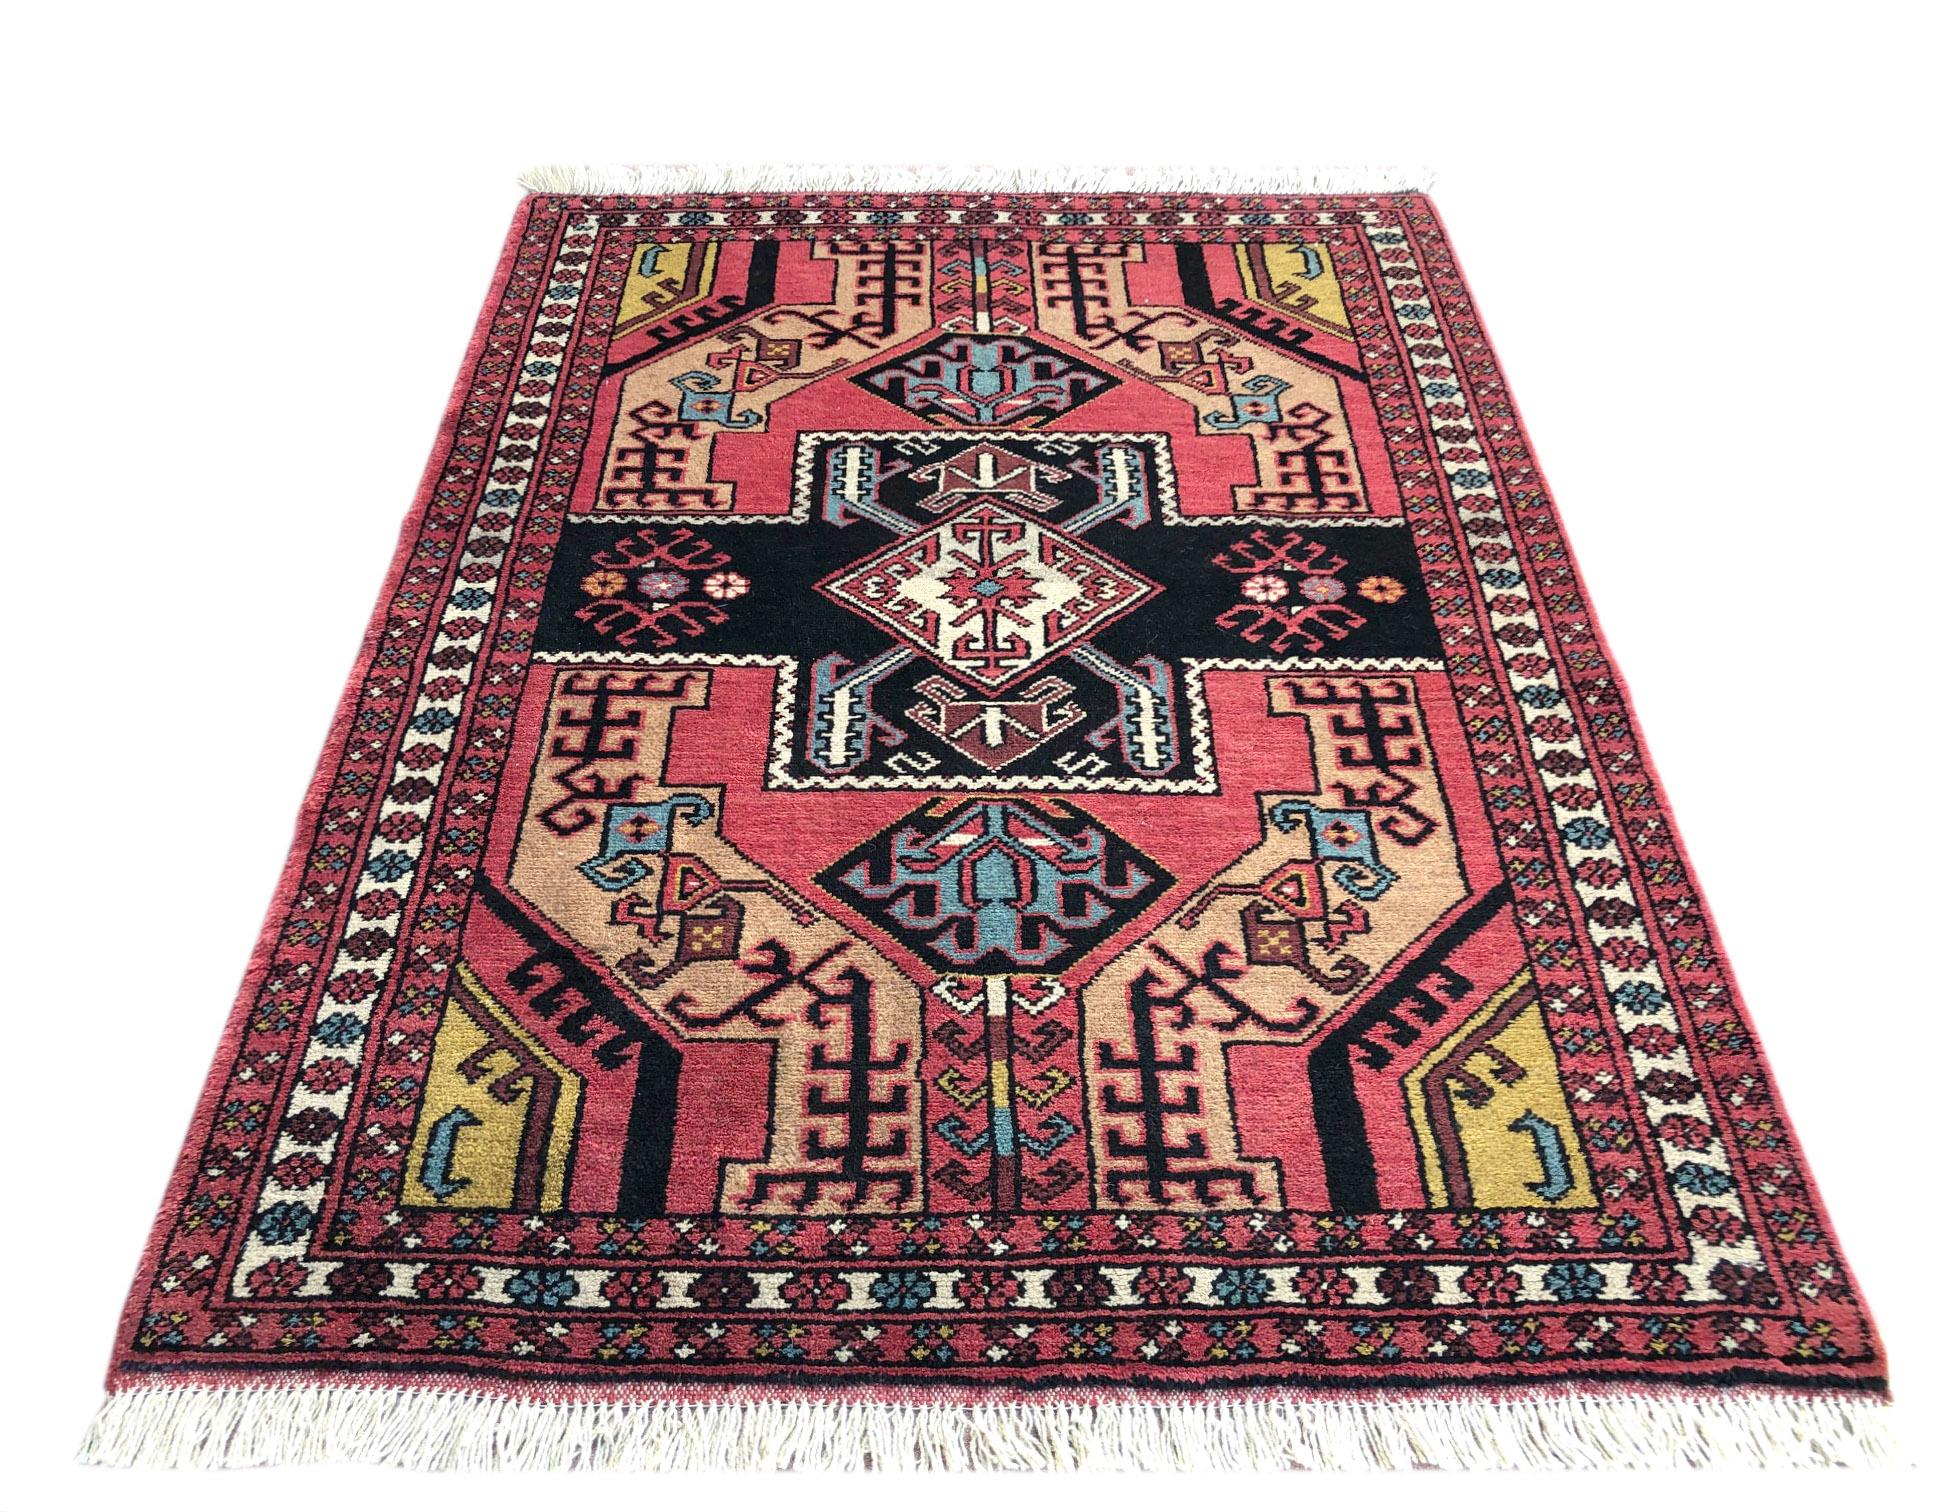 This authentic Persian Baluchi rug has wool pile and foundation which are hand knotted by the nomads of Baluchi. The age of this rug is almost 50 years old. The base color is salmon and the border color is salmon and cream. The size of this rug is 4